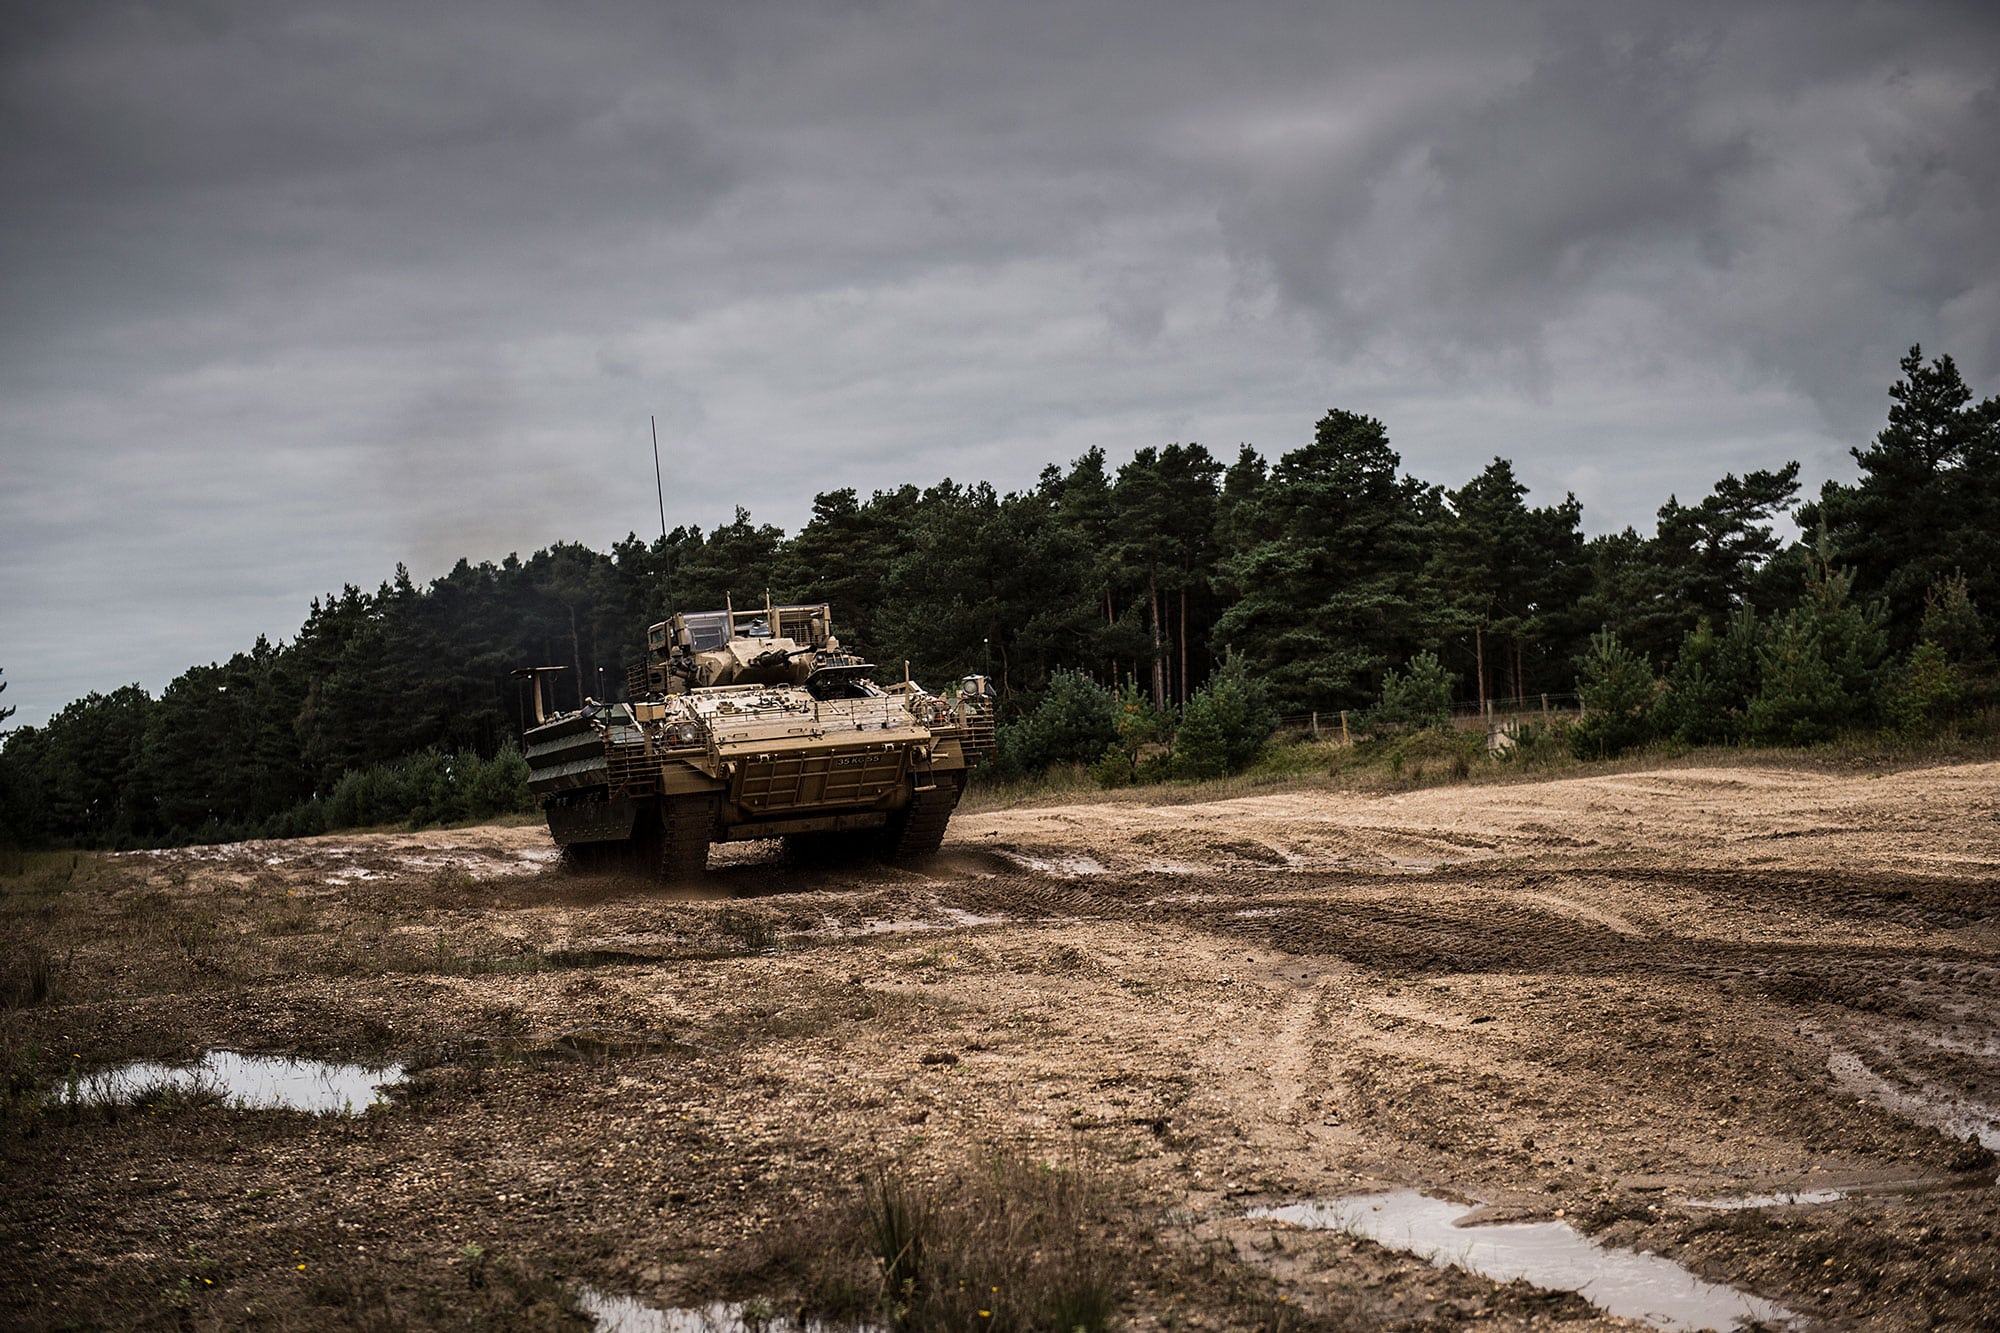 A military tank driving over mud